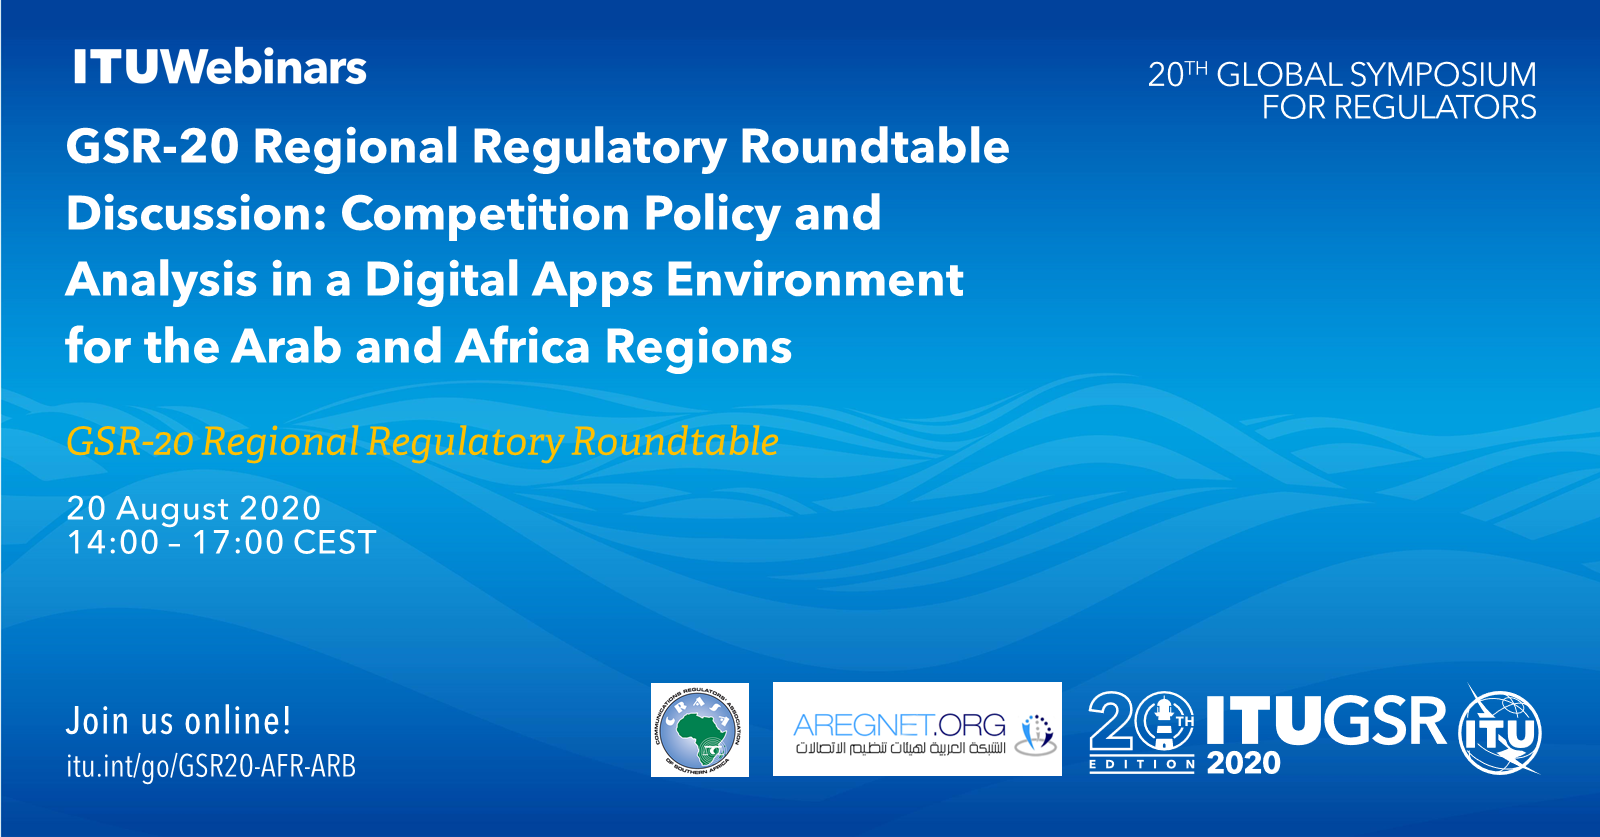 Gsr Regional Regulatory Roundtable Discussion Competition Policy And Analysis In Digital Apps Environment For Arab And Africa Regions